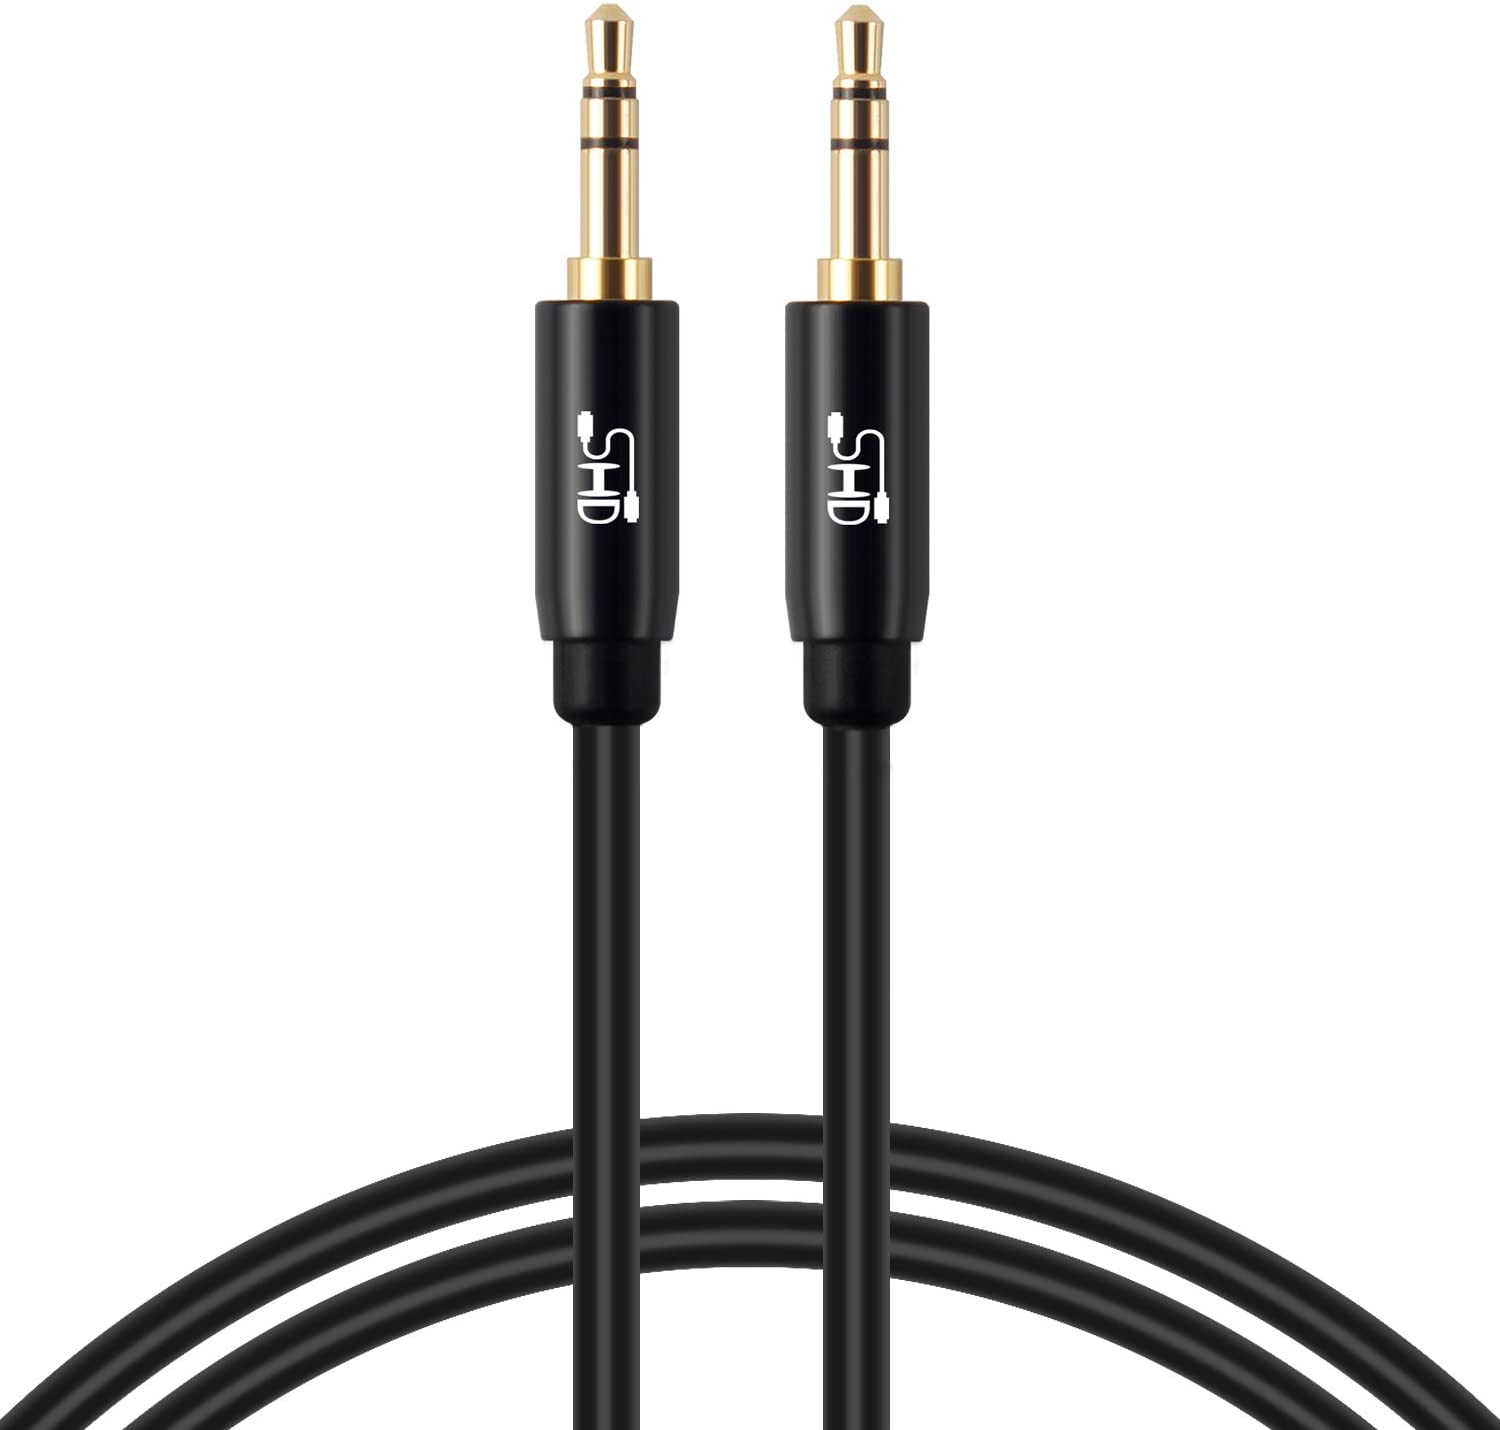 SHD Gold Plated Connector Auxiliary Audio Cable, 3-Foot